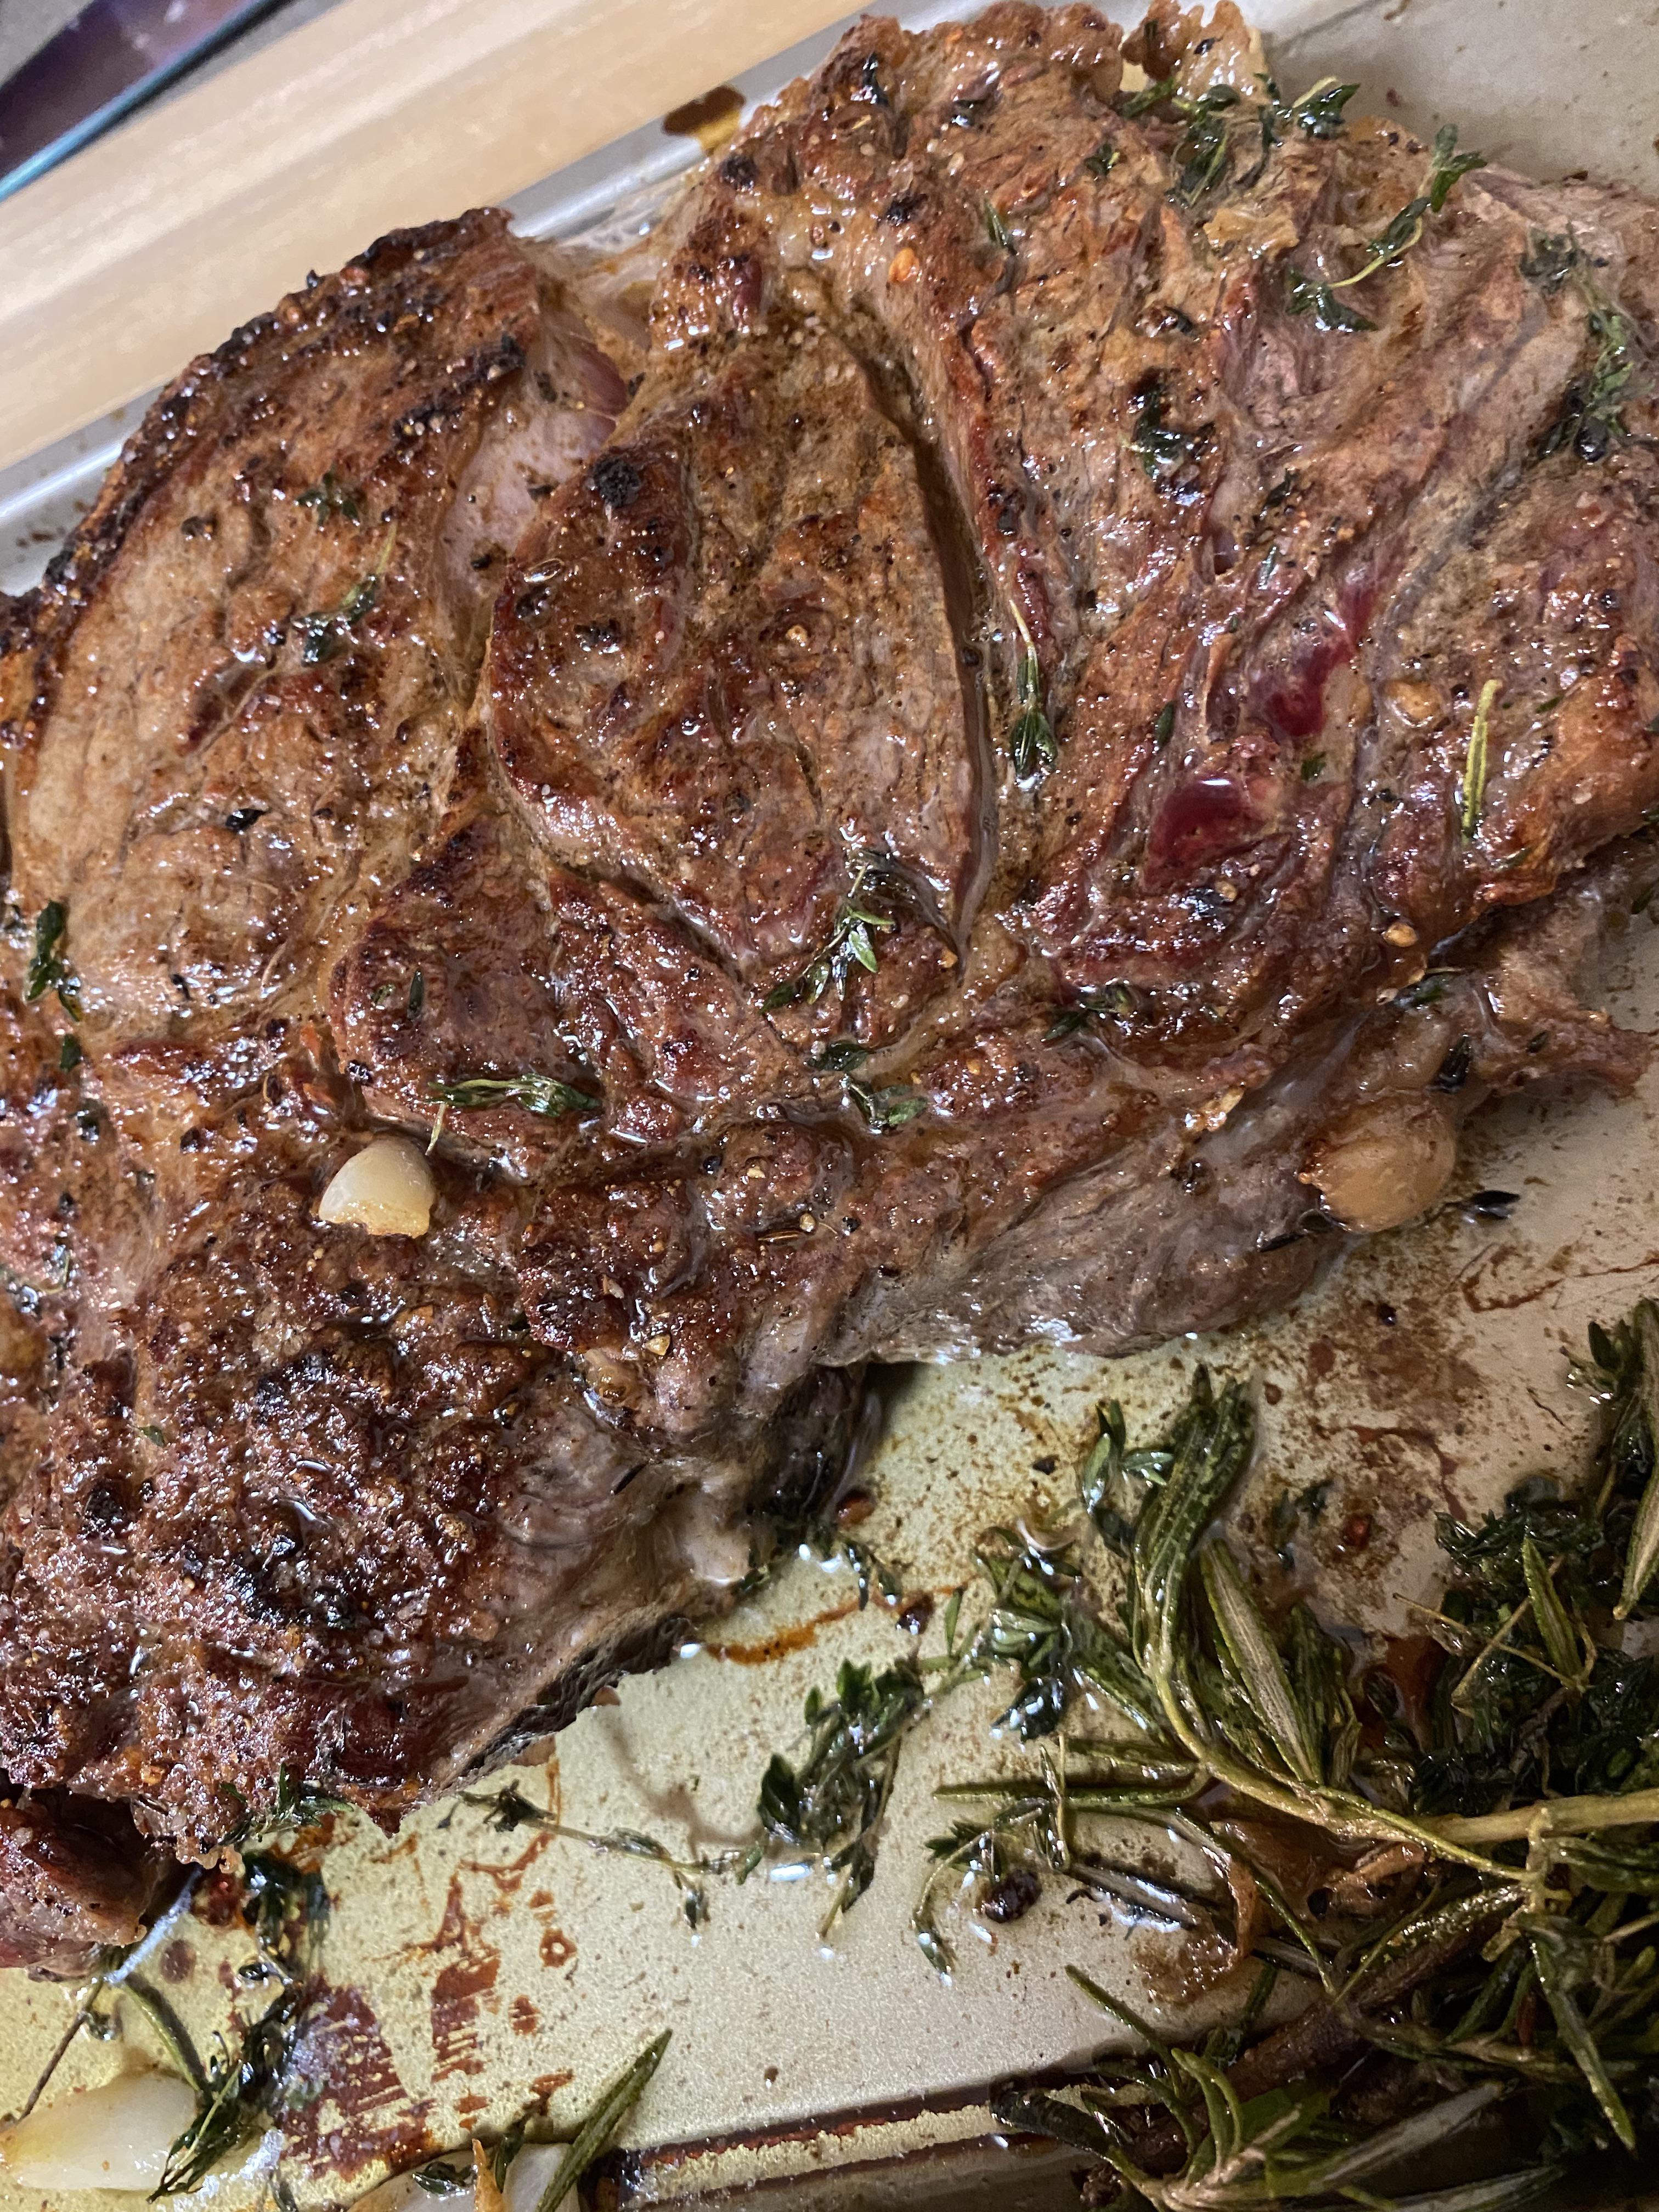 Homemade 27lb Ribeye Cast Iron Seared With Butter Thyme Rosemary Garlic Kosher Salt And 